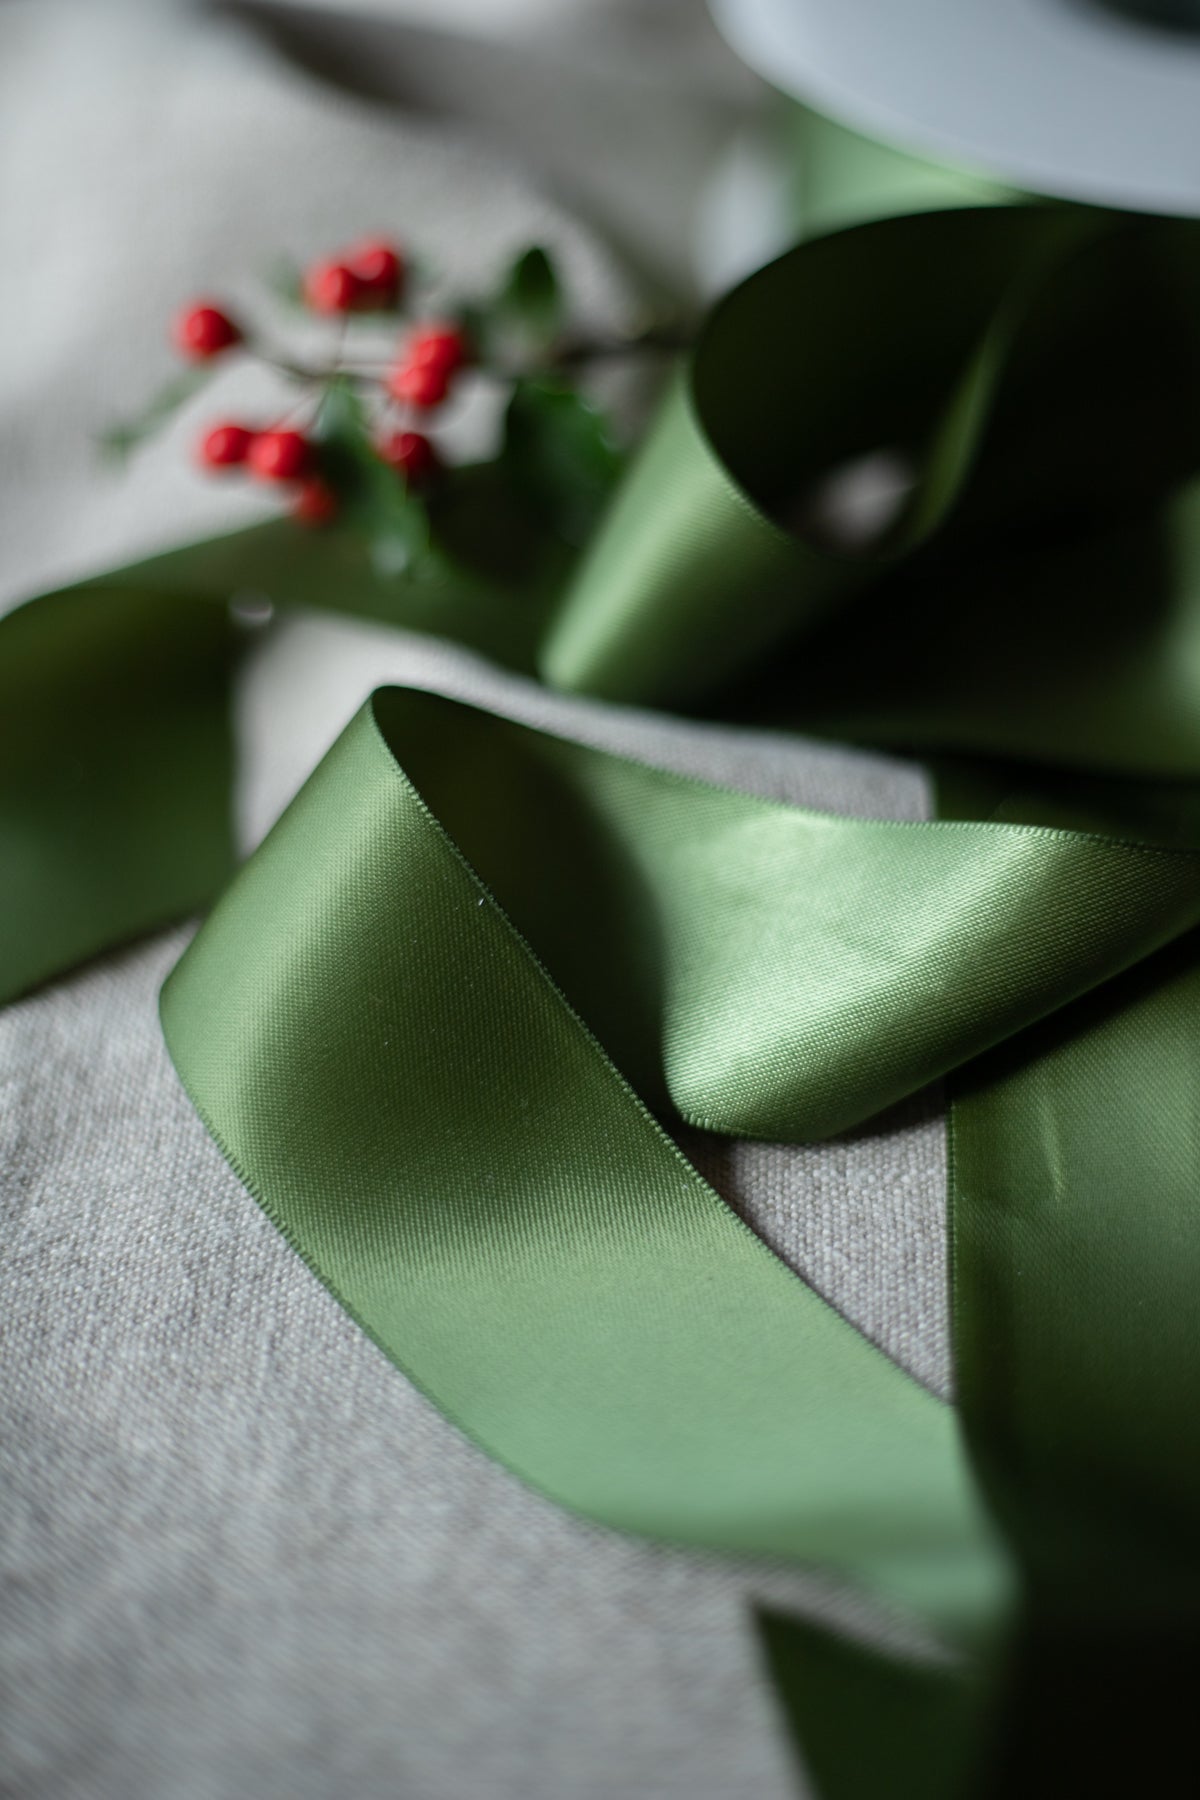 LEEQE Double Face Apple green Satin Ribbon 18 inch X 100 Yards Polyester  Apple green Ribbon for gift Wrapping Very Suitable for